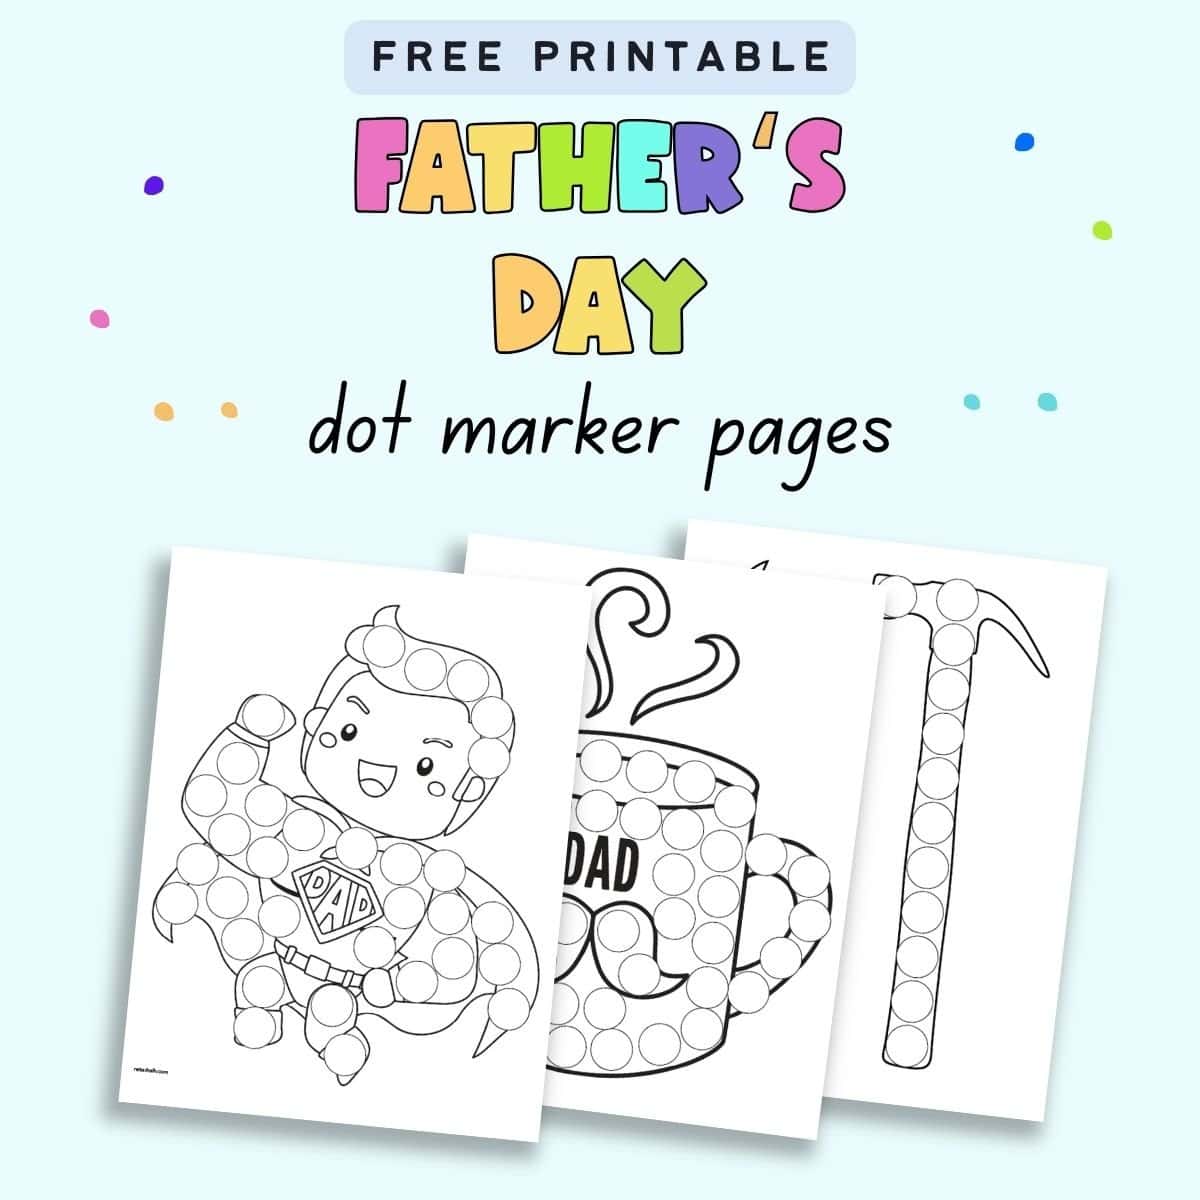 Text "free printable Father's Day dot marker pages" with a preview of three dot marker pages